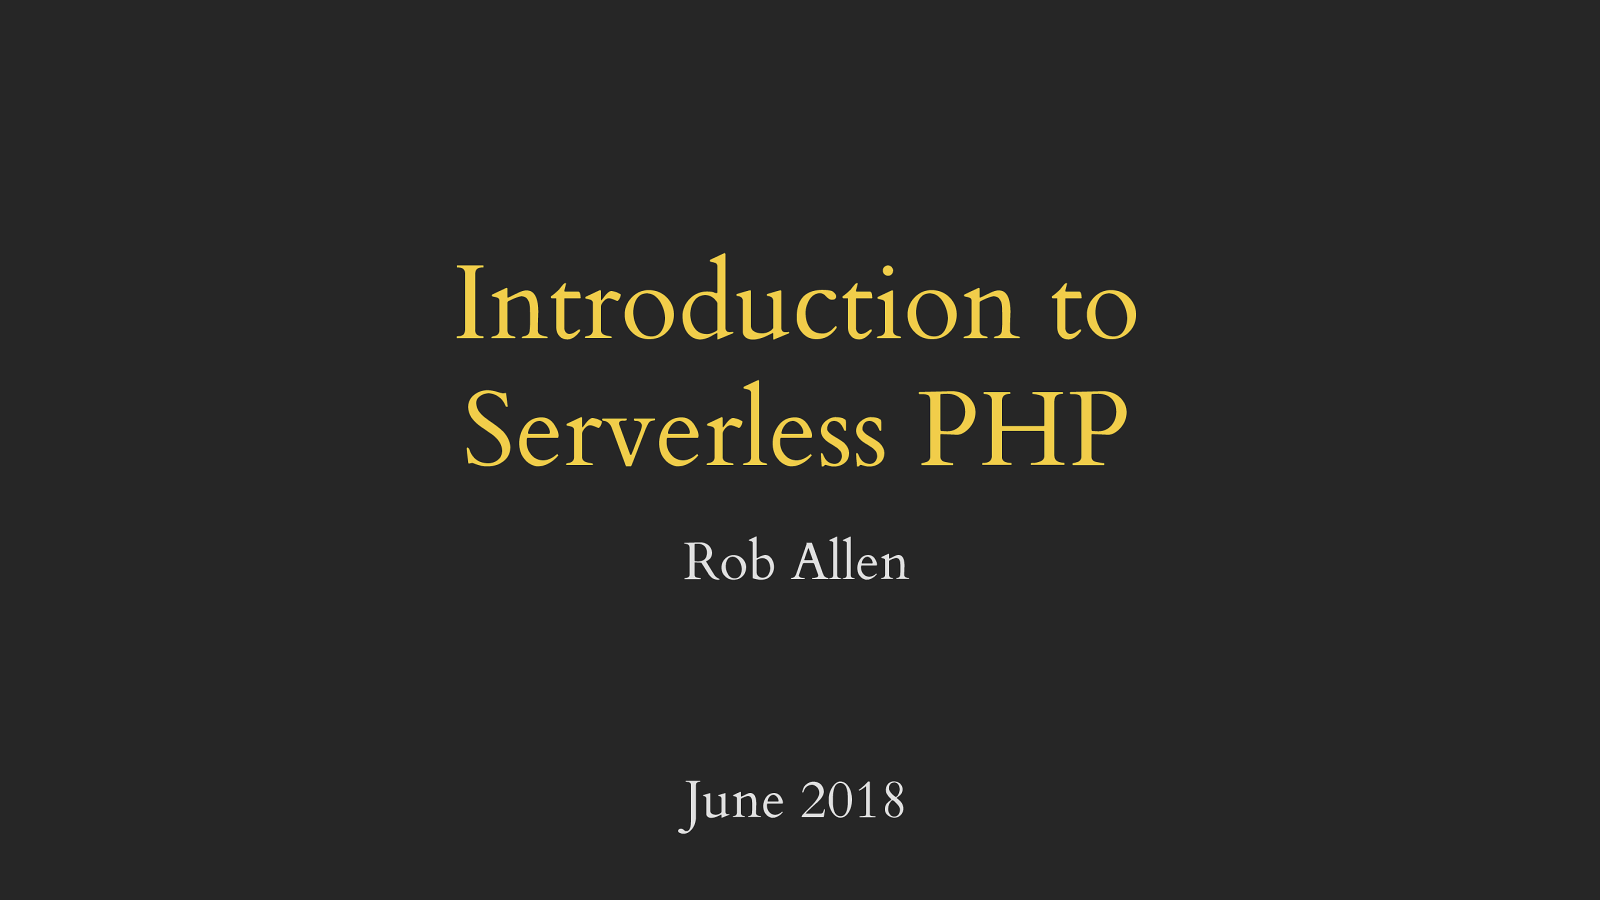 Introduction to Serverless PHP